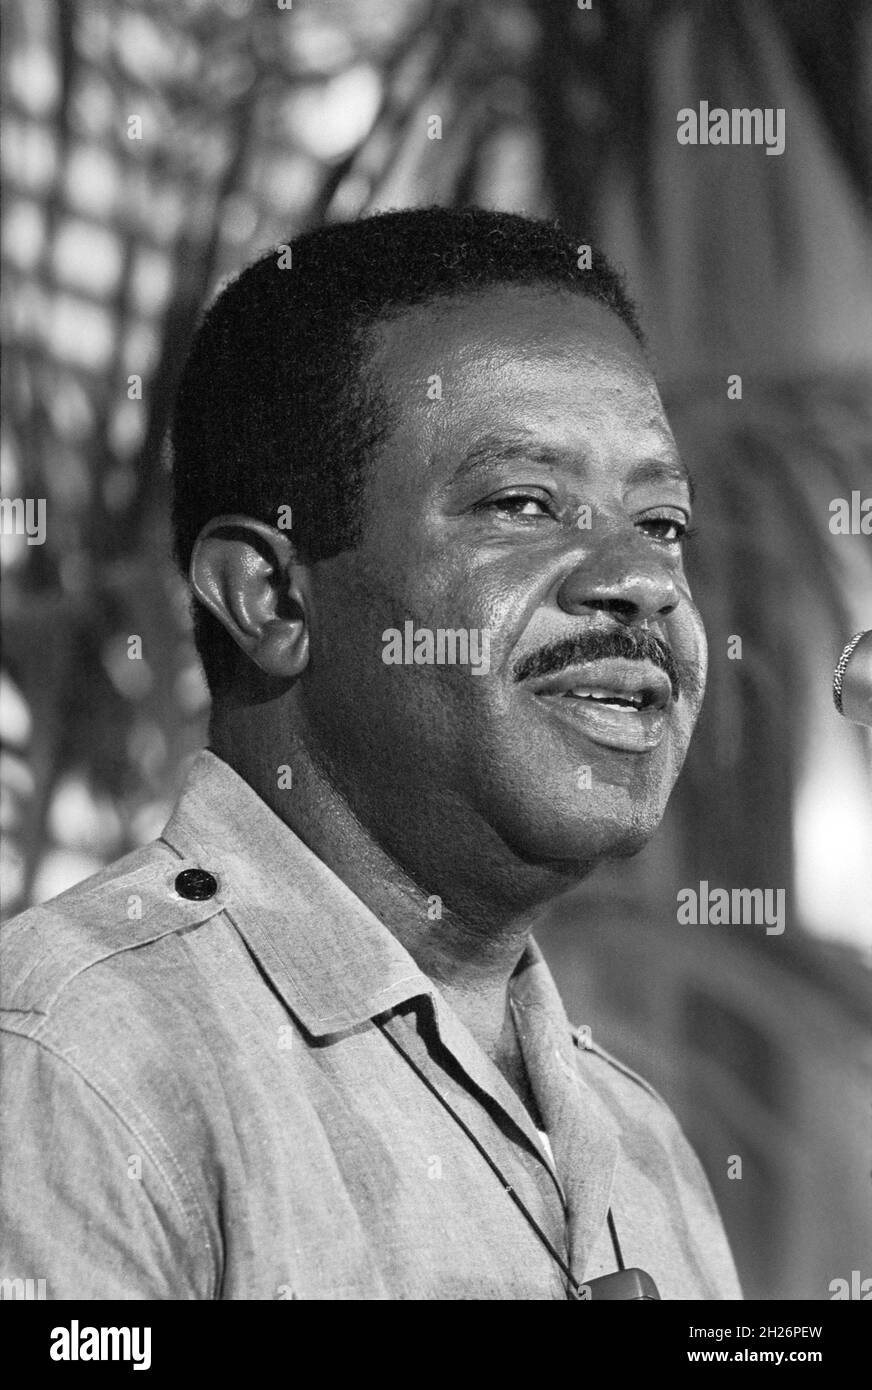 Reverend Ralph David Abernathy, American civil rights activist and Baptist minister, head and shoulders portrait, speaking at a National Press Club luncheon, Washington, D.C., USA, Warren K. Leffler, US News & World Report Magazine Collection, June 14, 1968 Stock Photo